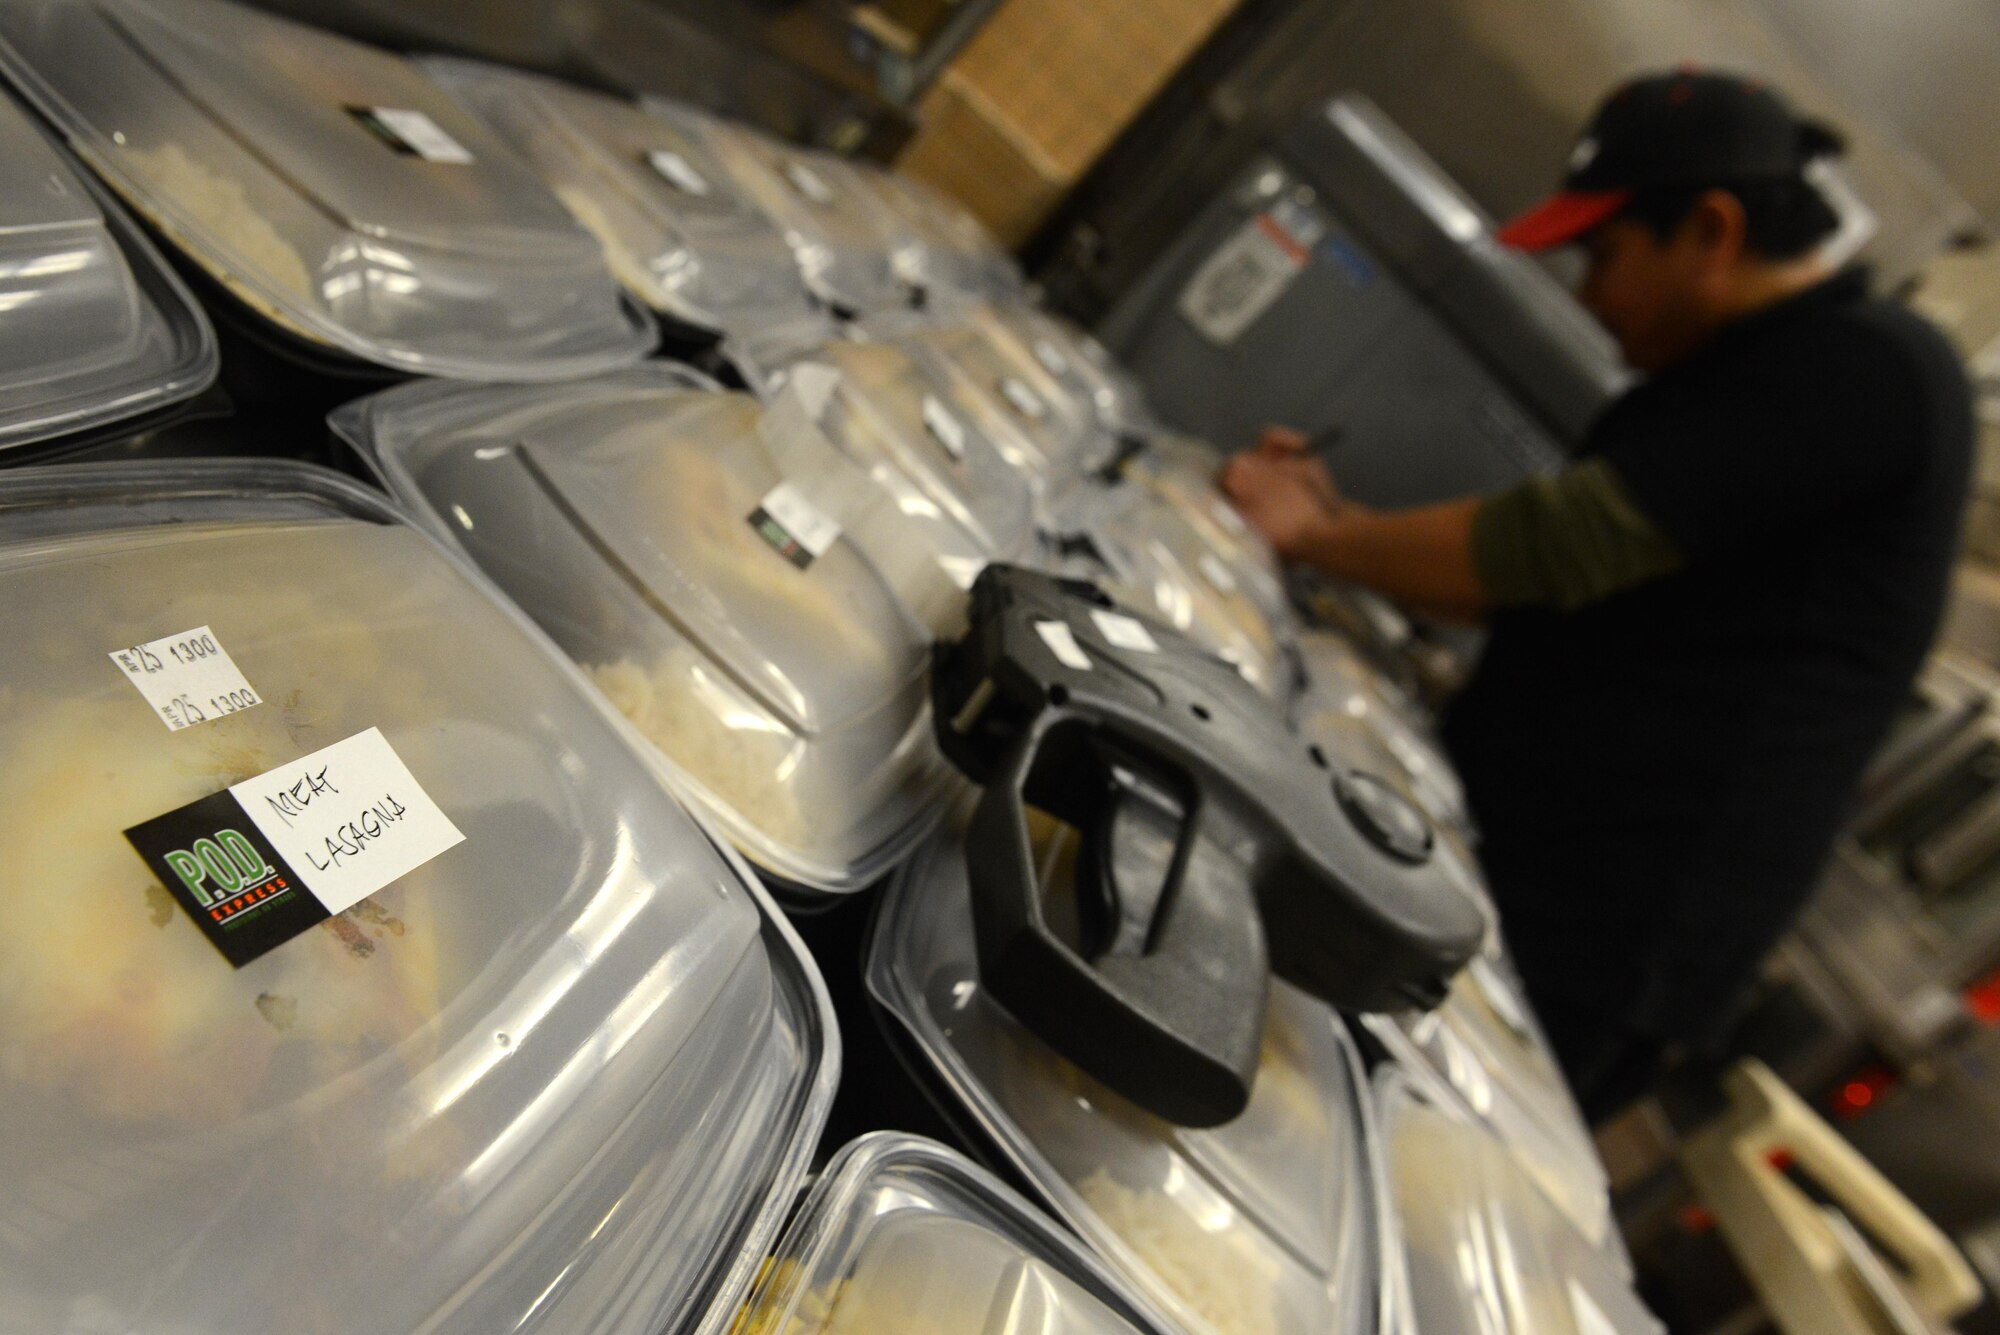 Rodel Magno, 673d Force Support Squadron Iditarod Dining Facility cook, writes the contents of the meal on to-go containers for the Provisions on Demand at Joint Base Elmendorf-Richardson, Alaska, April 25, 2017. The meals are in to-go containers because the POD’s primary customers are flightline personnel who do not have a lot of time and need hot meals. 